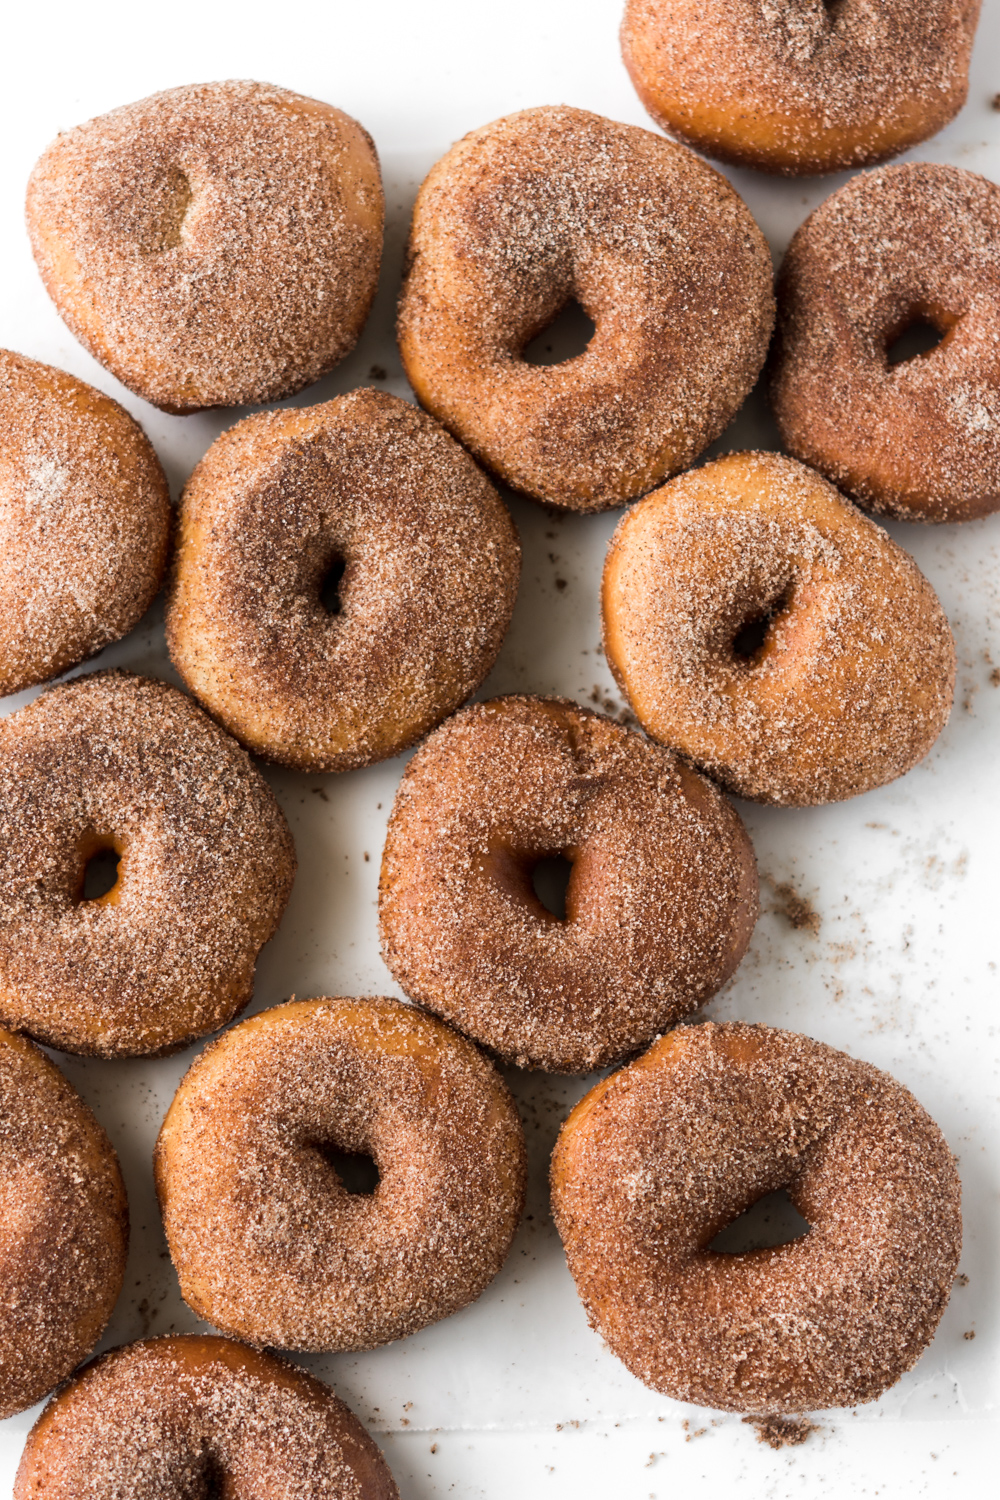 fried cinnamon sugar donuts | With Spice